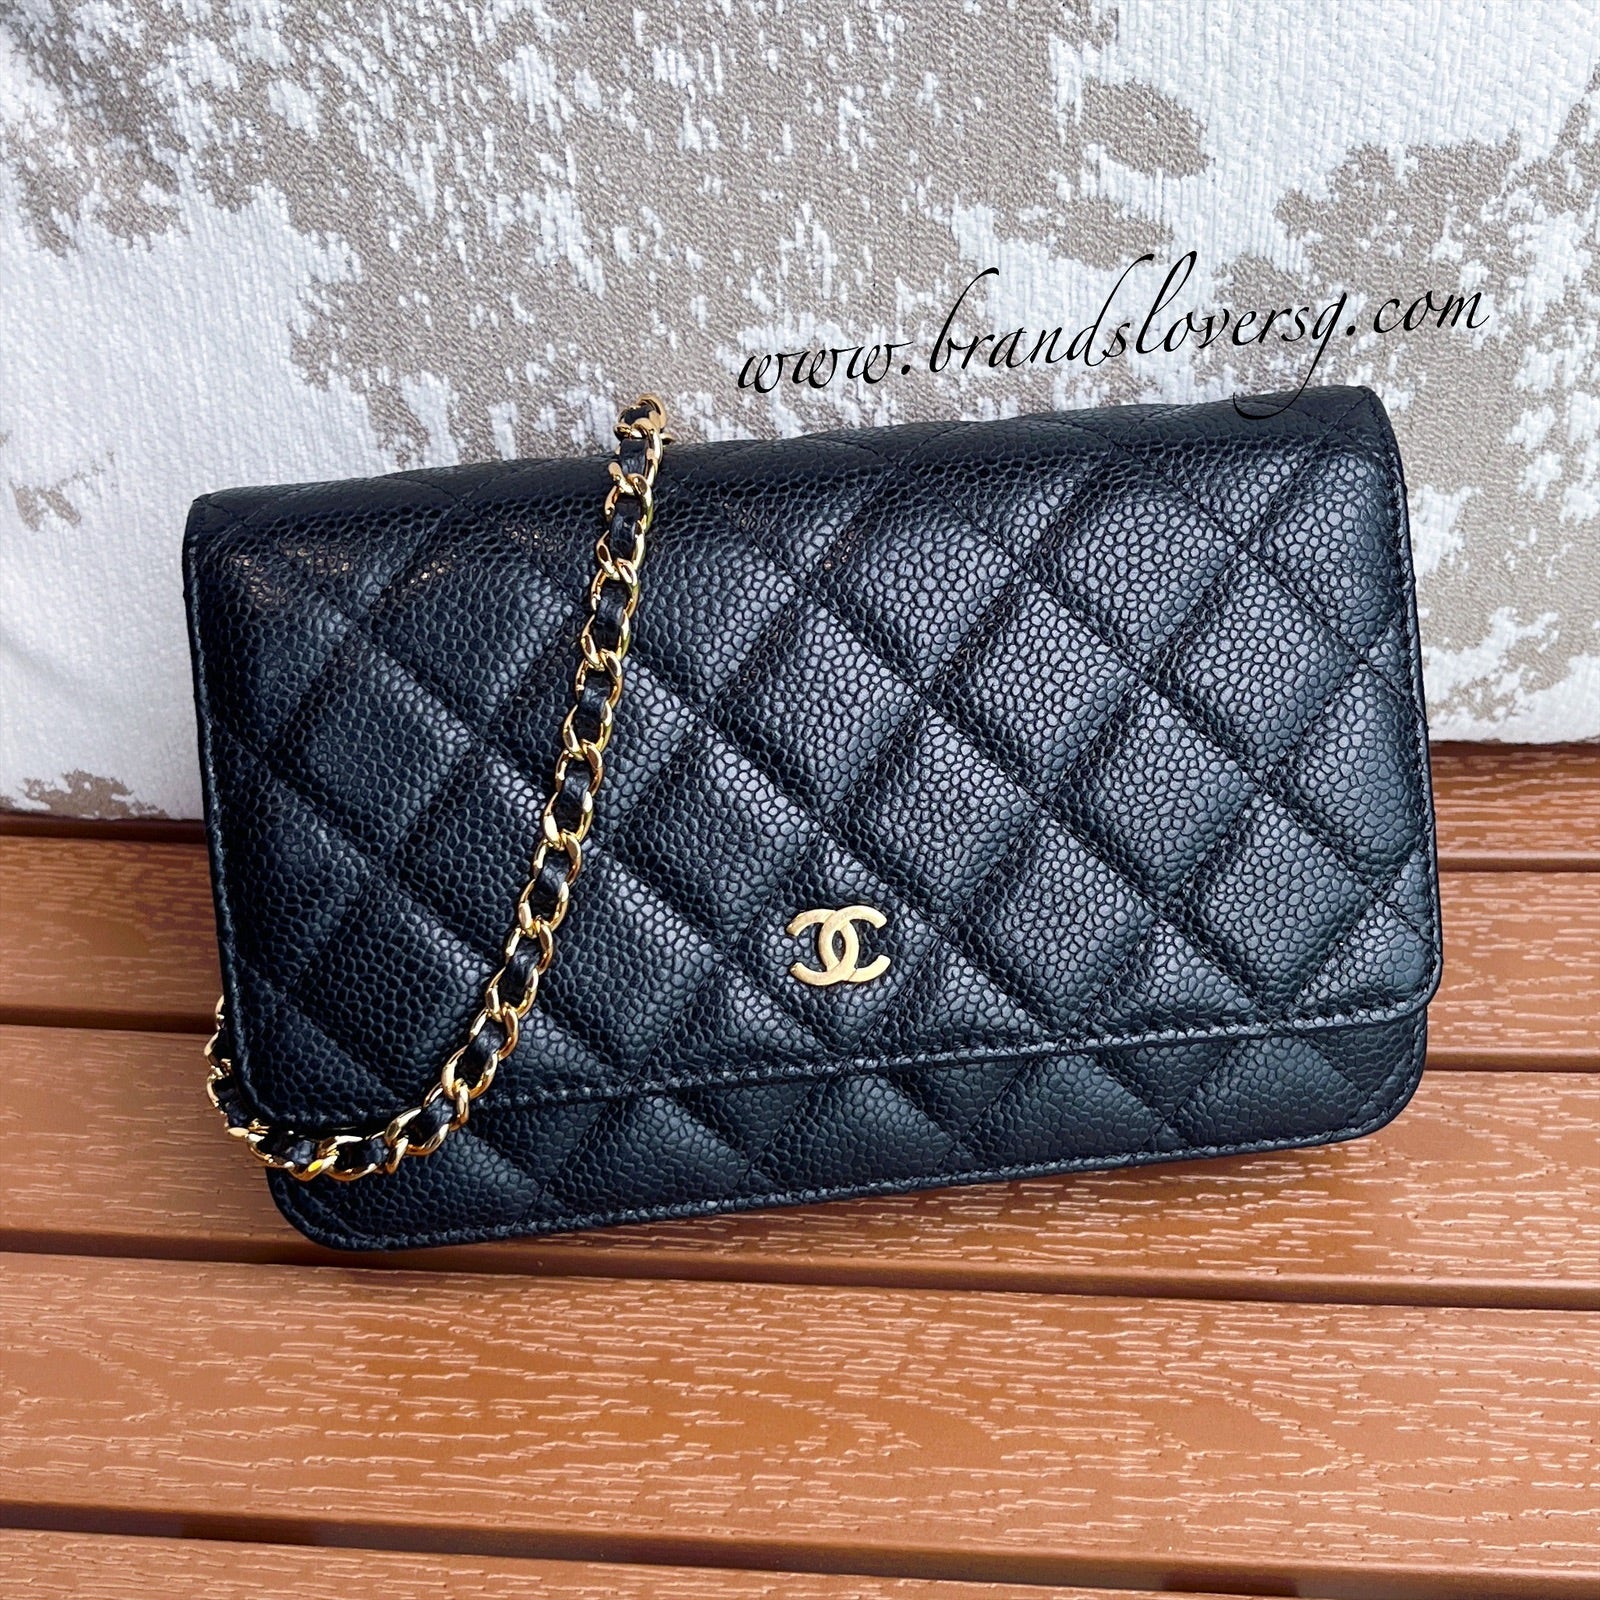 wallet on chain chanel white